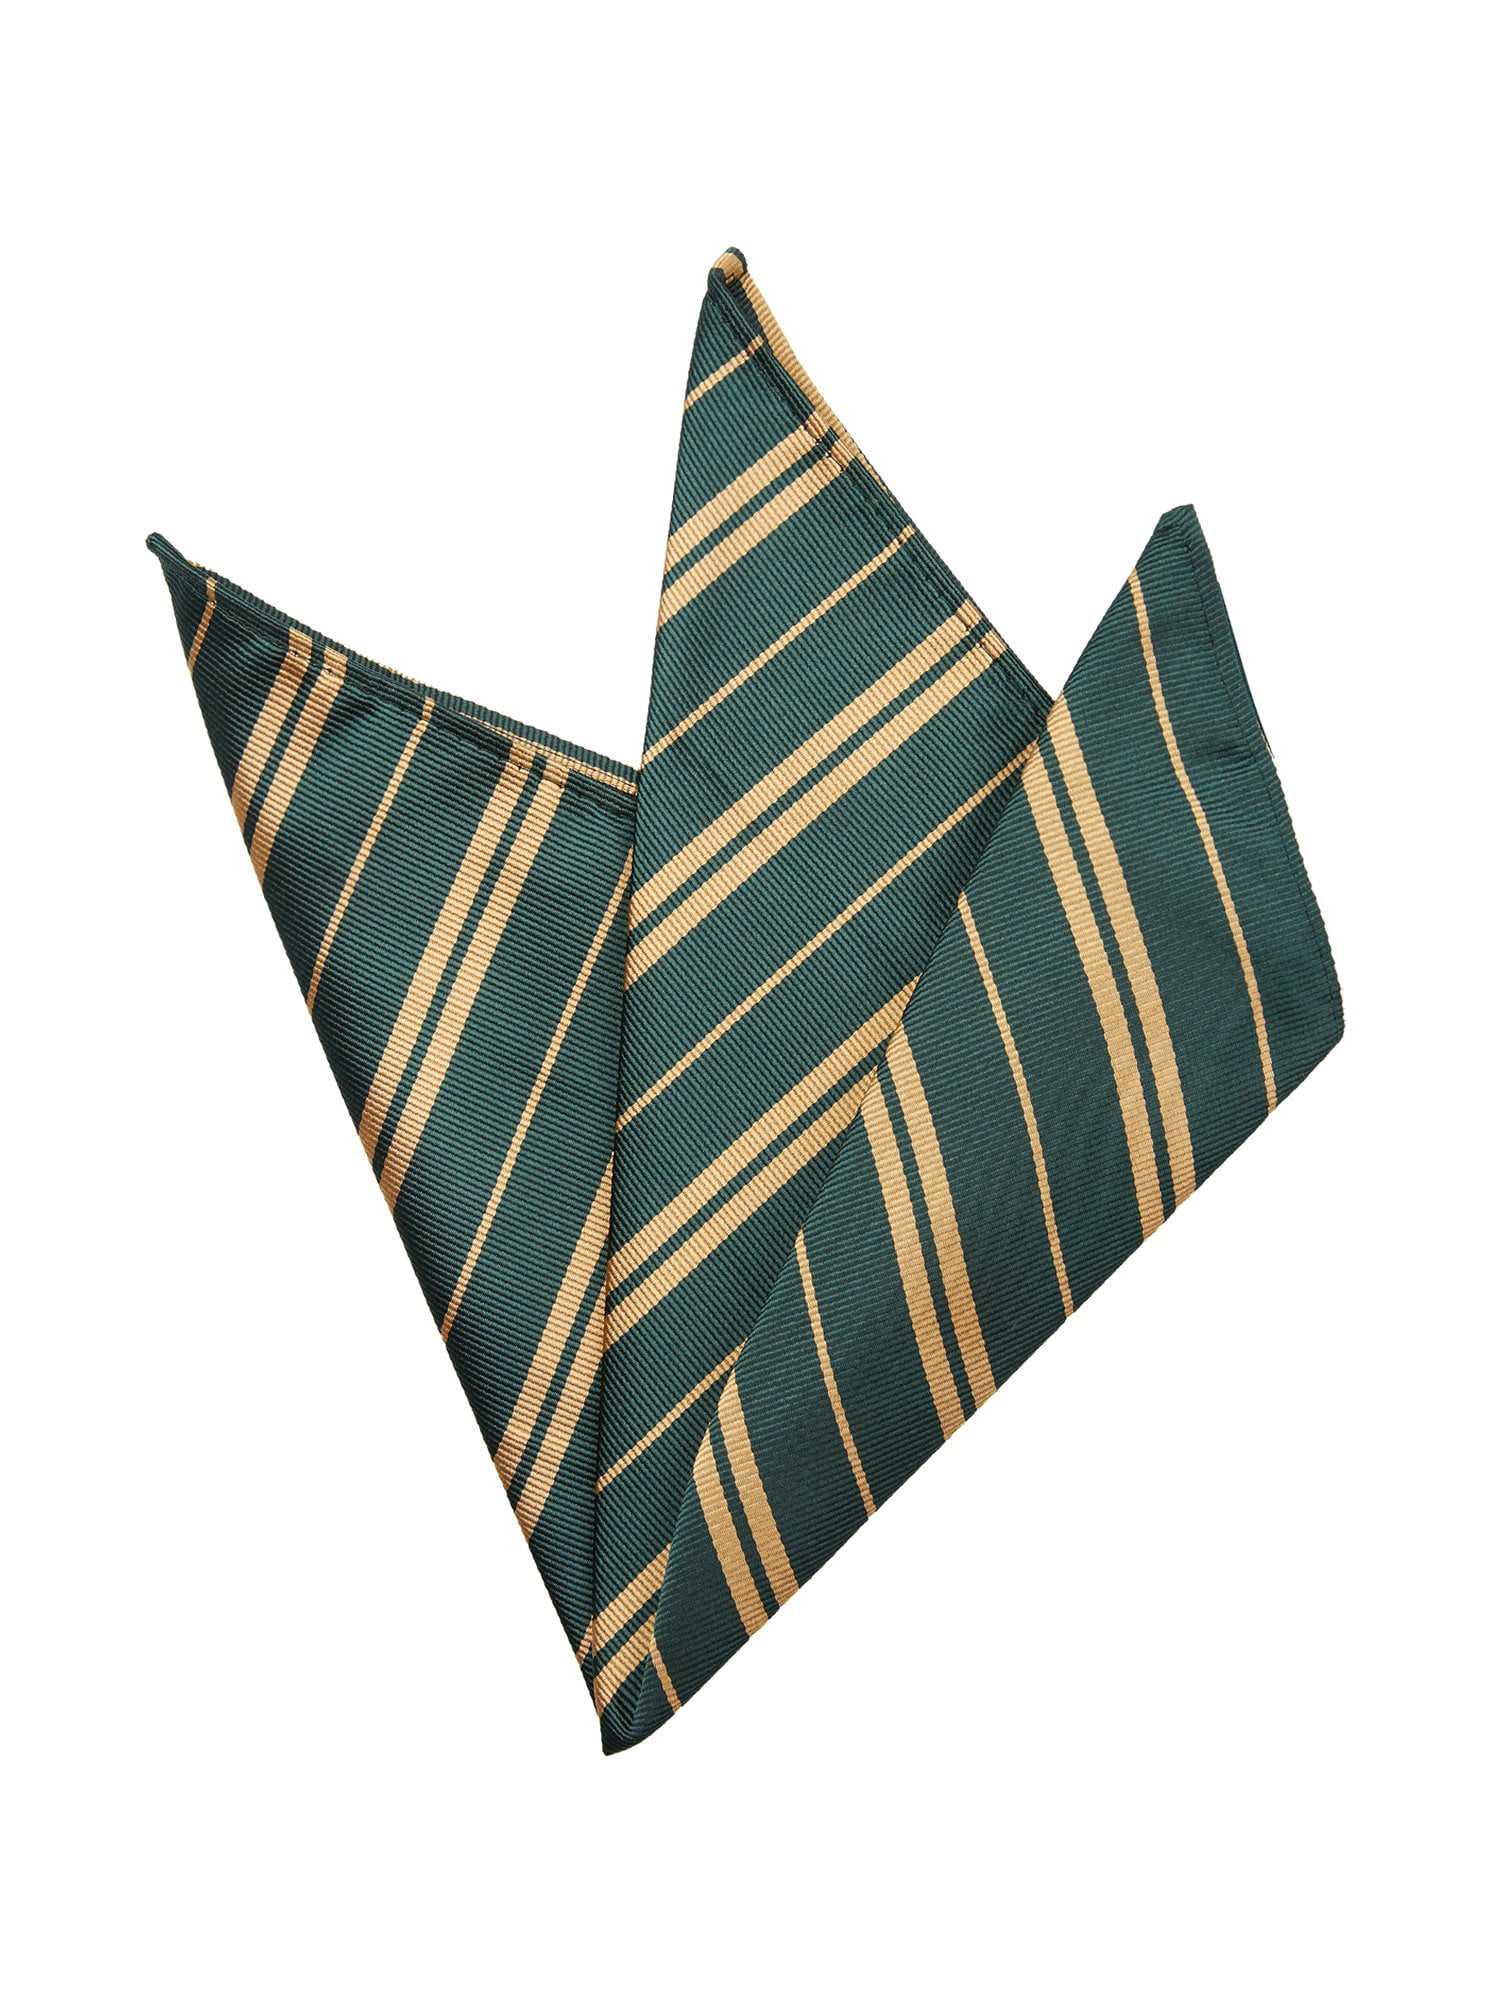 Jacob Alexander Woven Double Stripe Men's Pre-Tied Banded Bow Tie and  Pocket Square Set - Hunter Green Gold